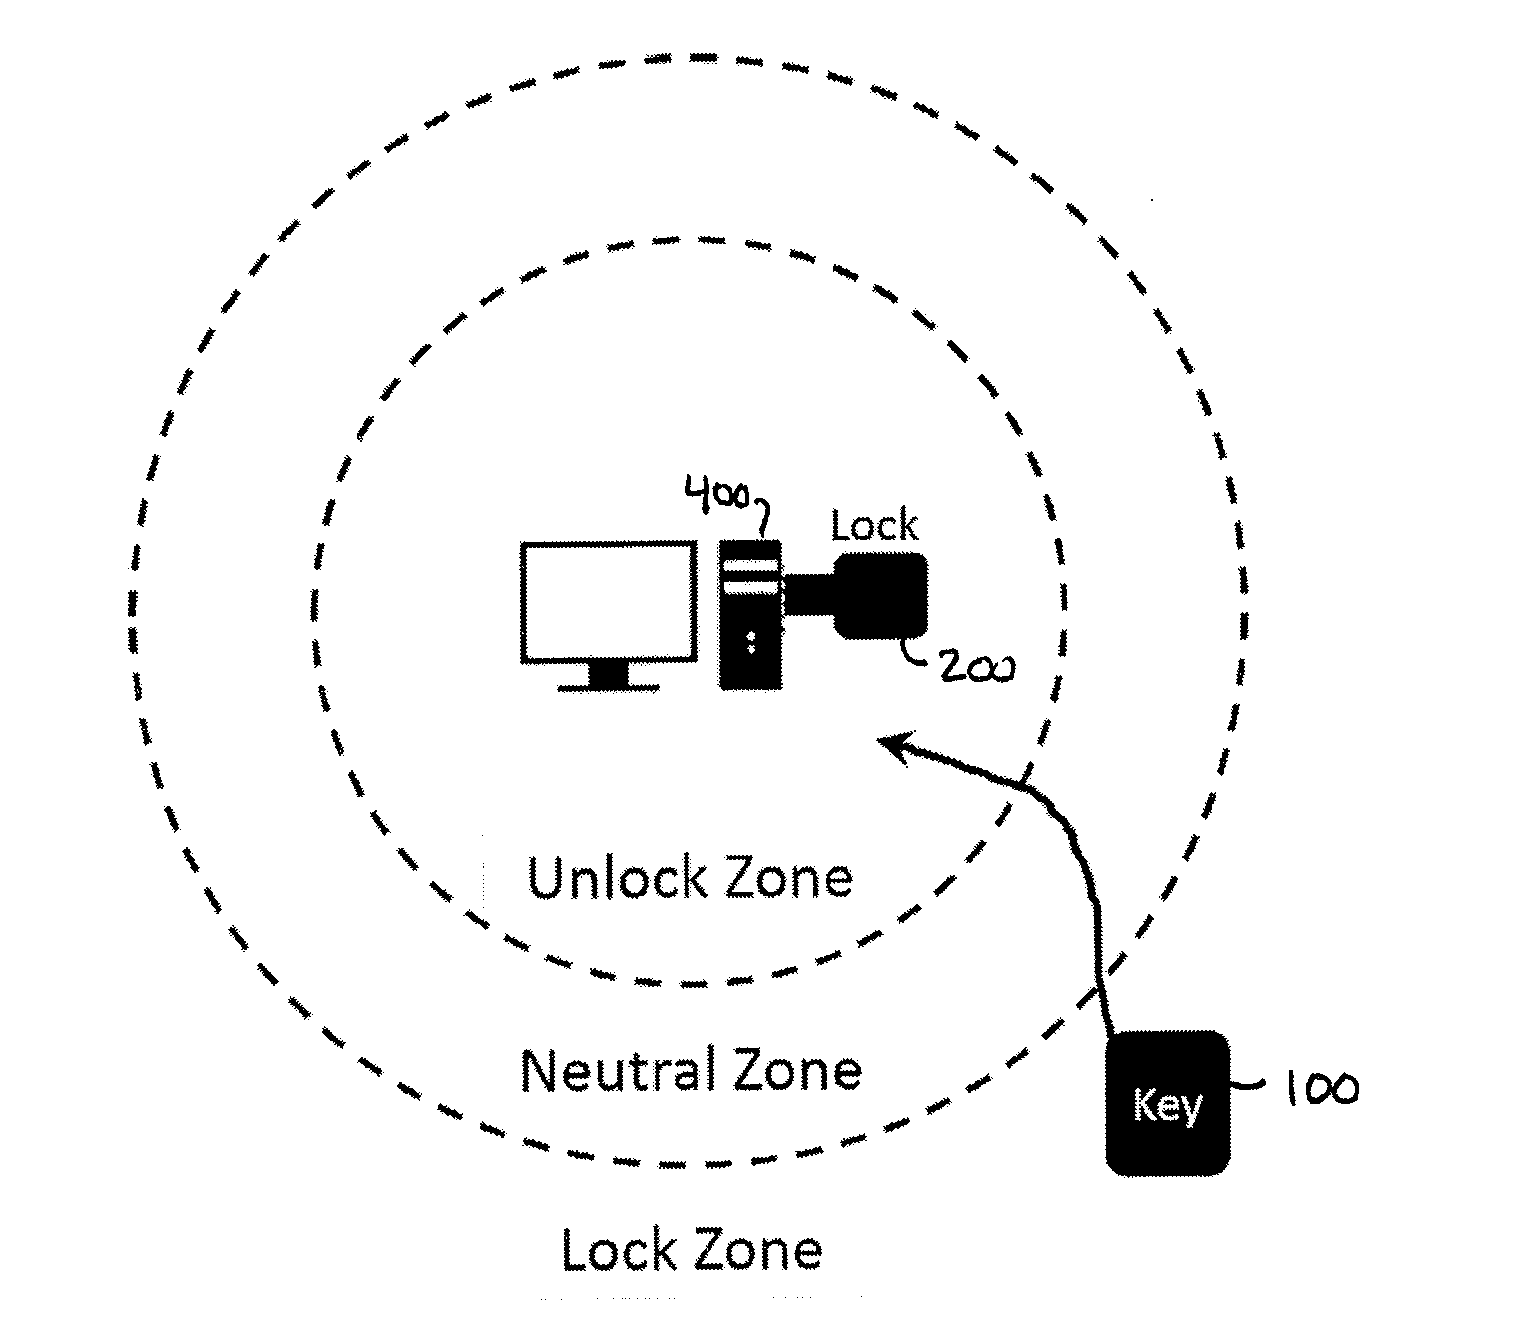 System and method for wireless proximity-based access to a computing device